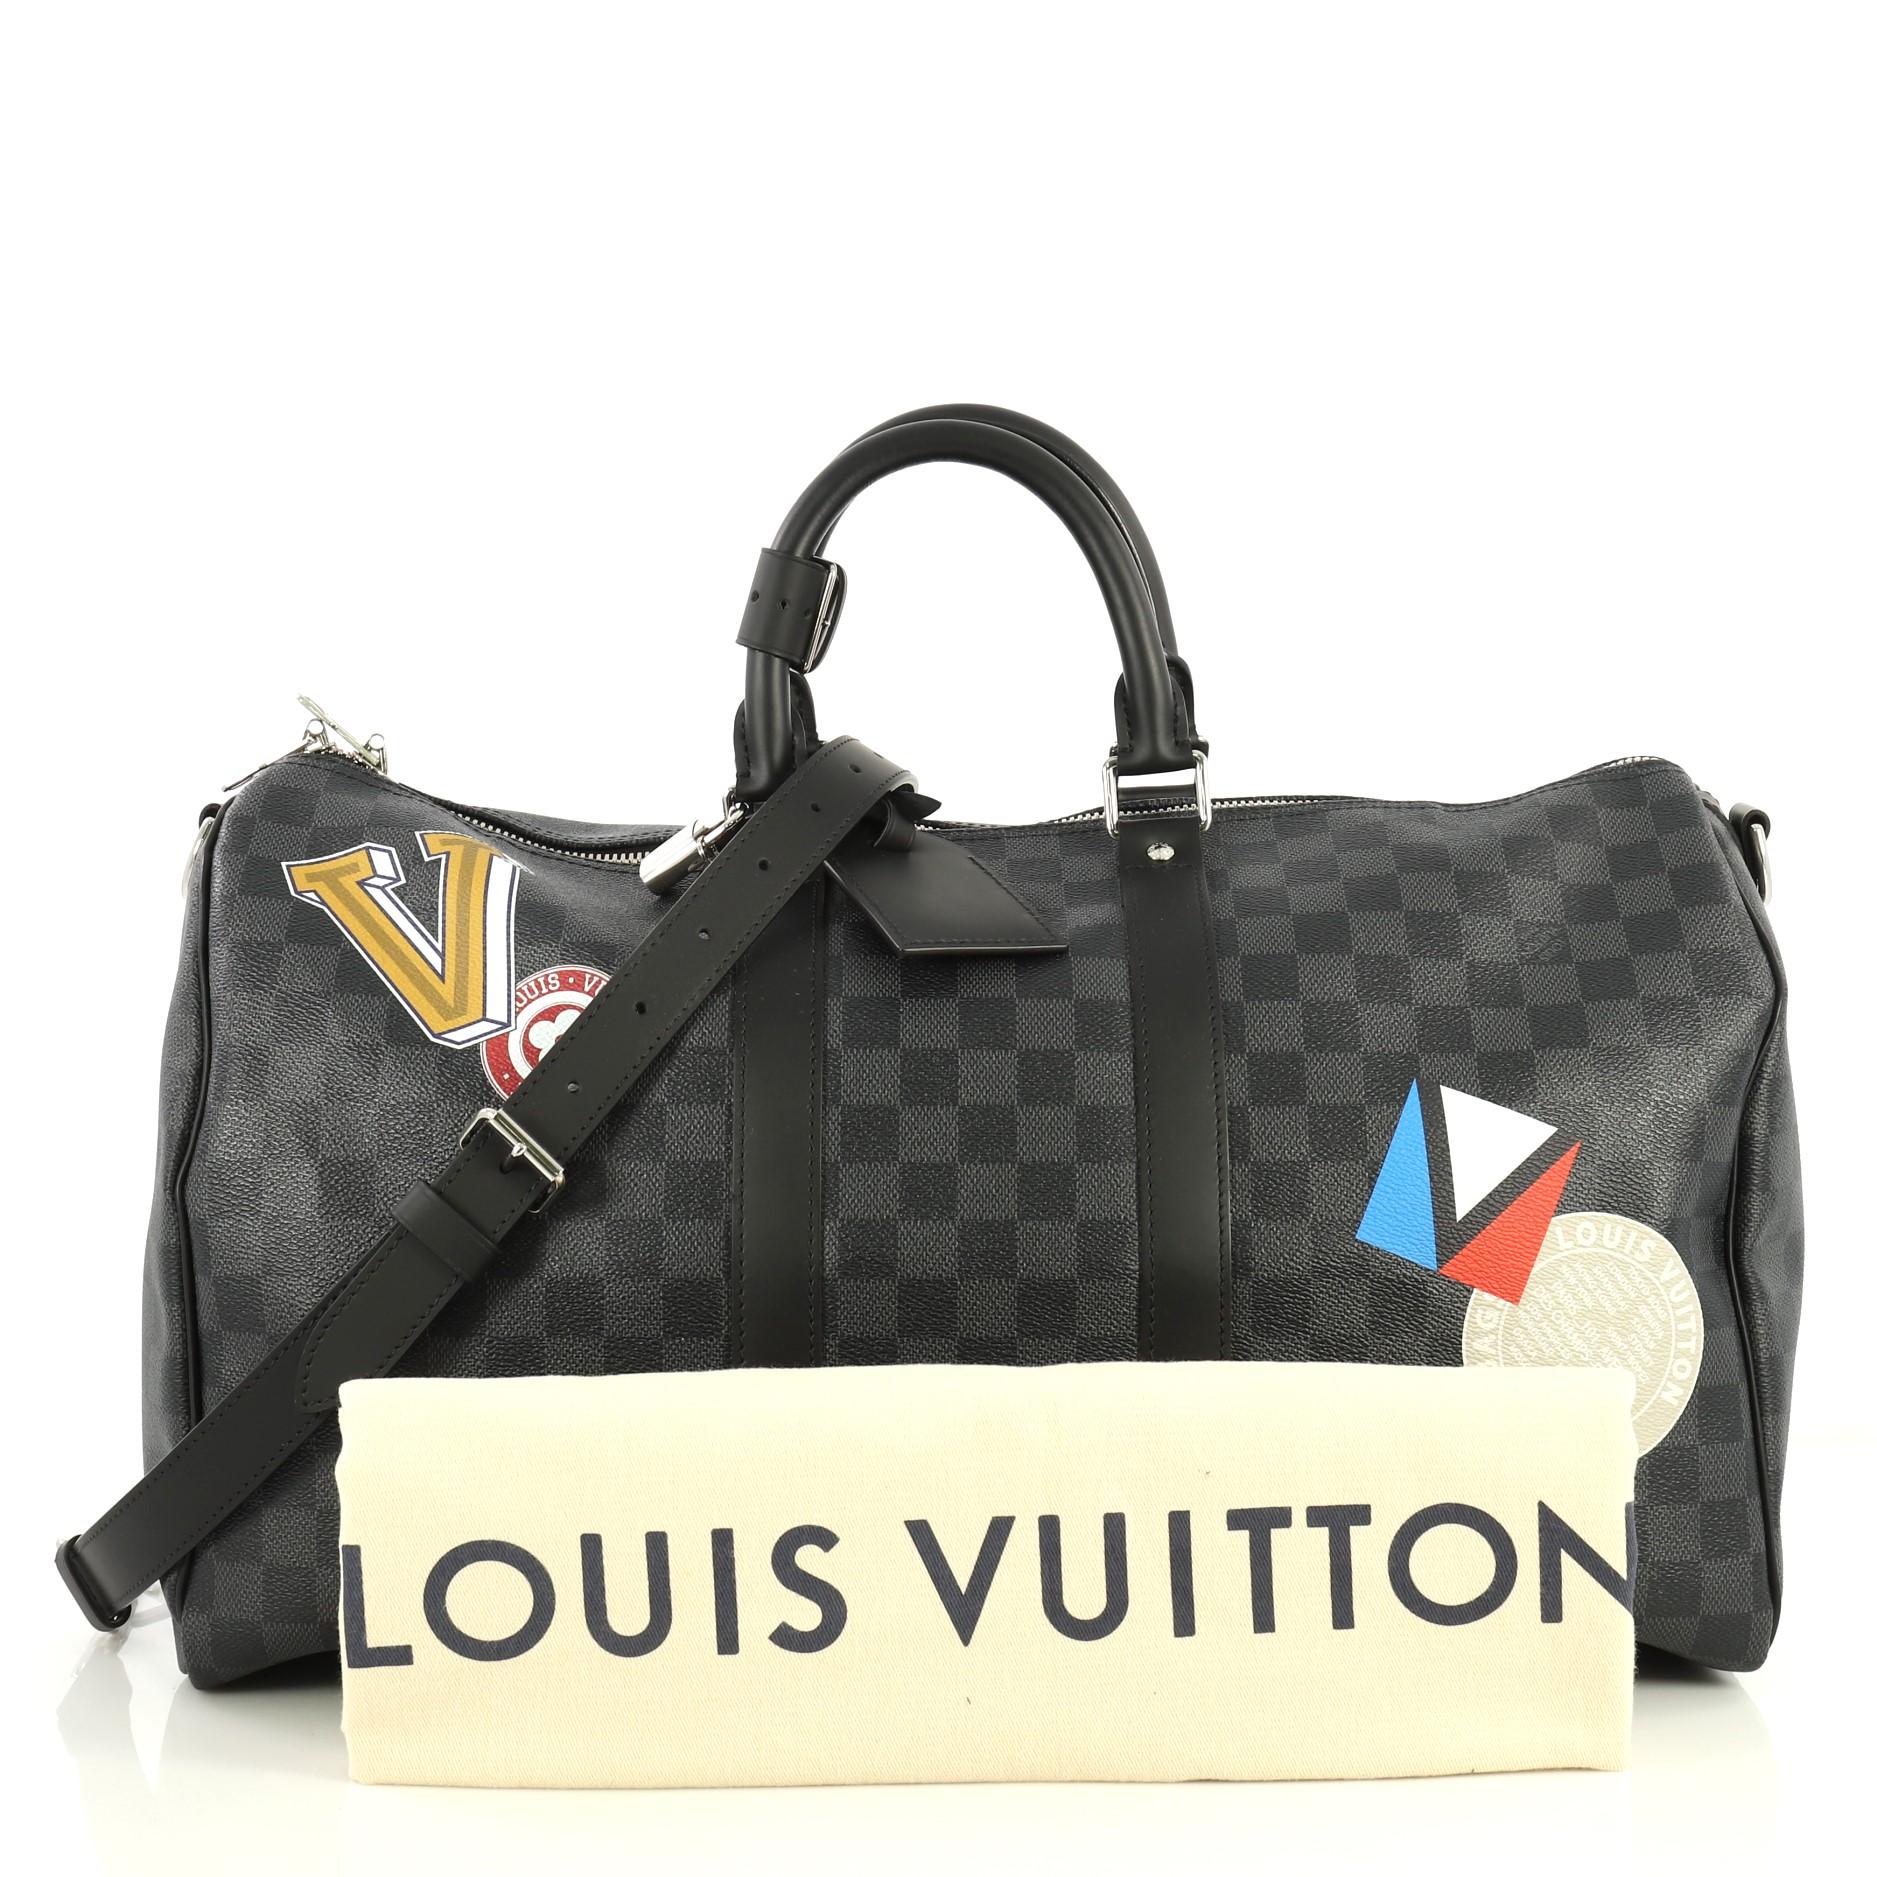 This Louis Vuitton Keepall Bandouliere Bag Limited Edition Damier Graphite LV League 45, crafted in Damier graphite coated canvas, features dual-rolled leather handles, travel patches and silver-tone hardware. Its zip closure opens to a black fabric